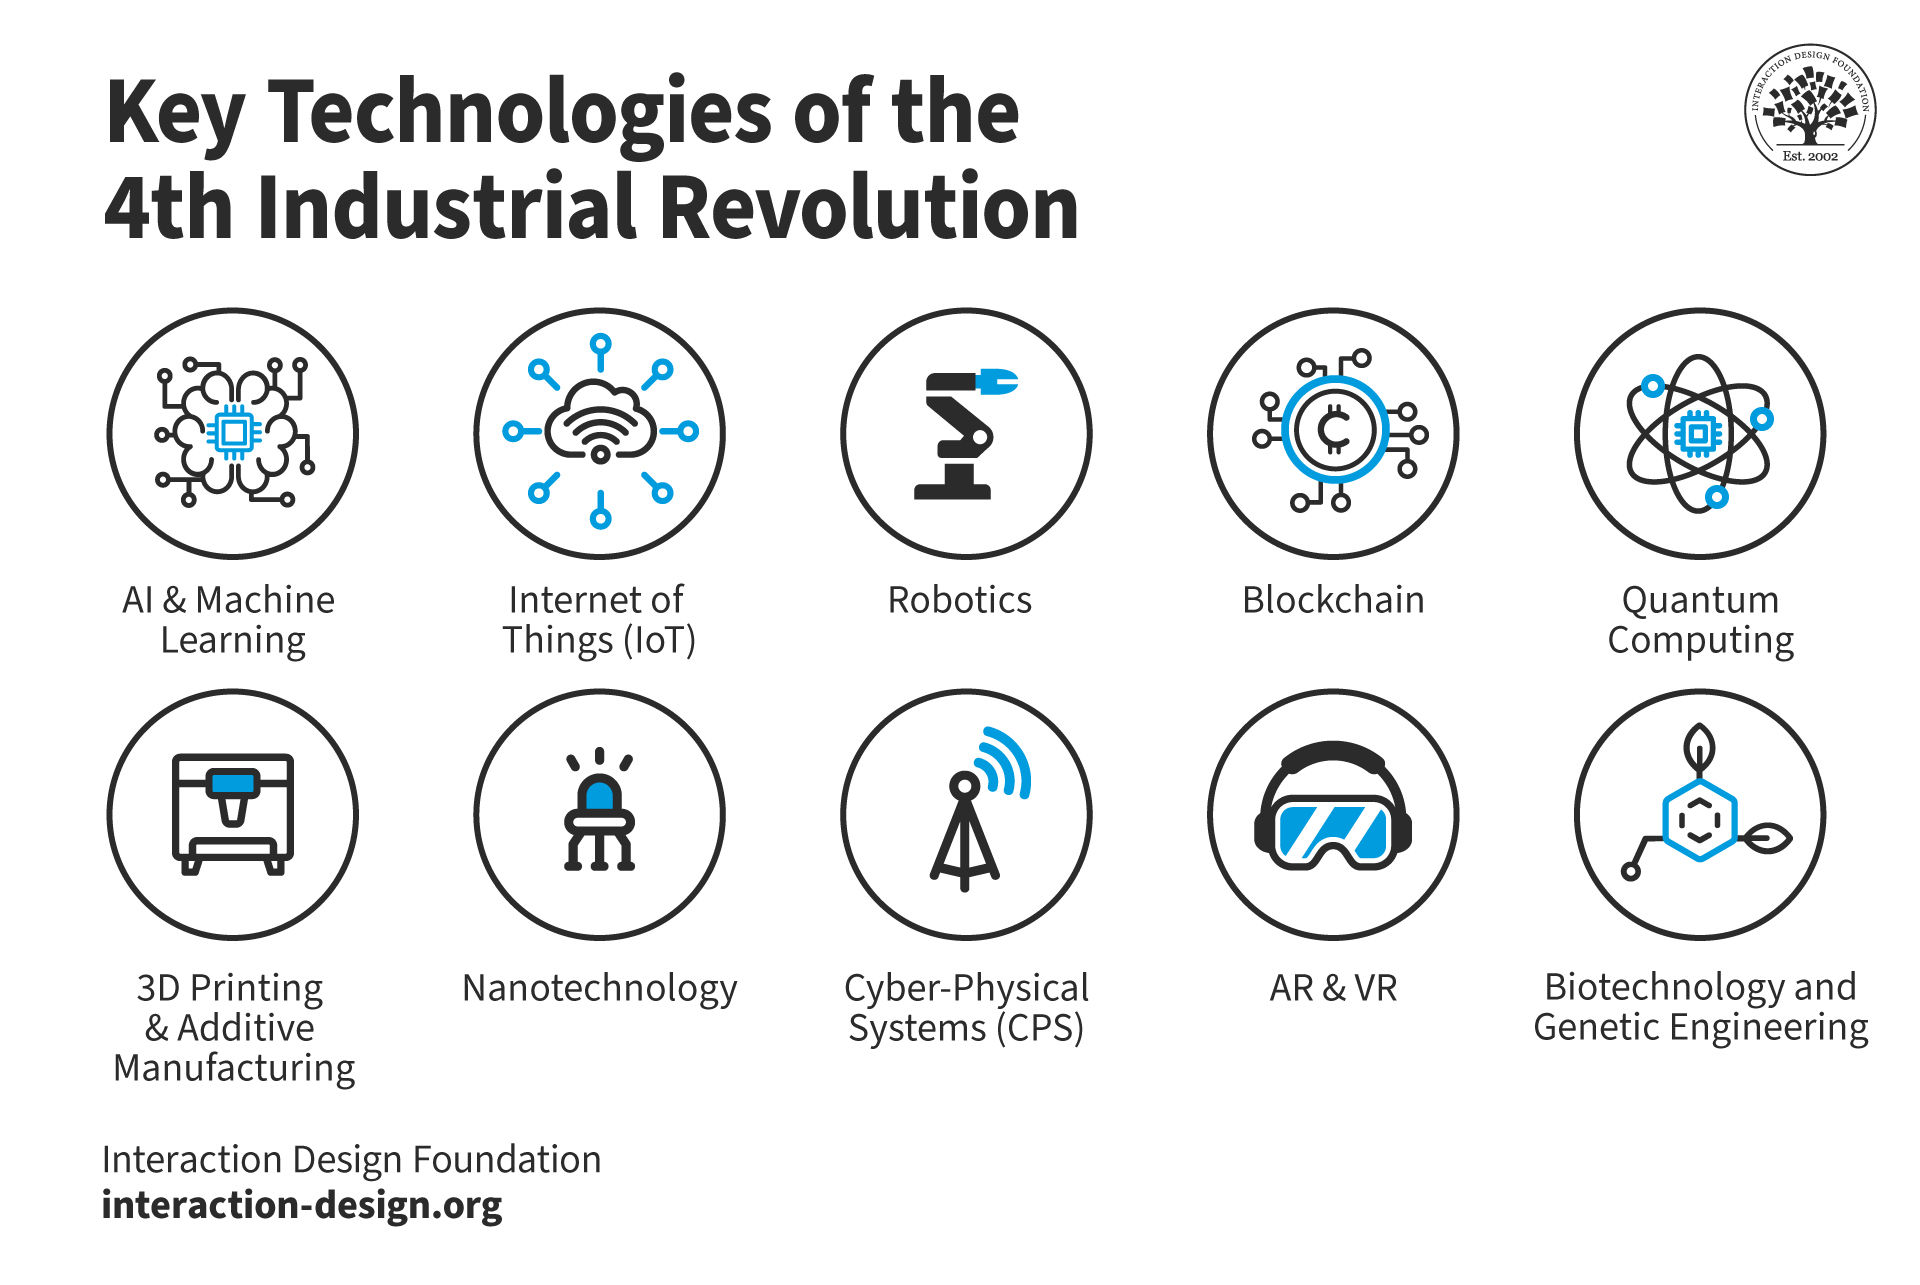 An illustration that shows the key technologies of the Fourth Industrial Revolution